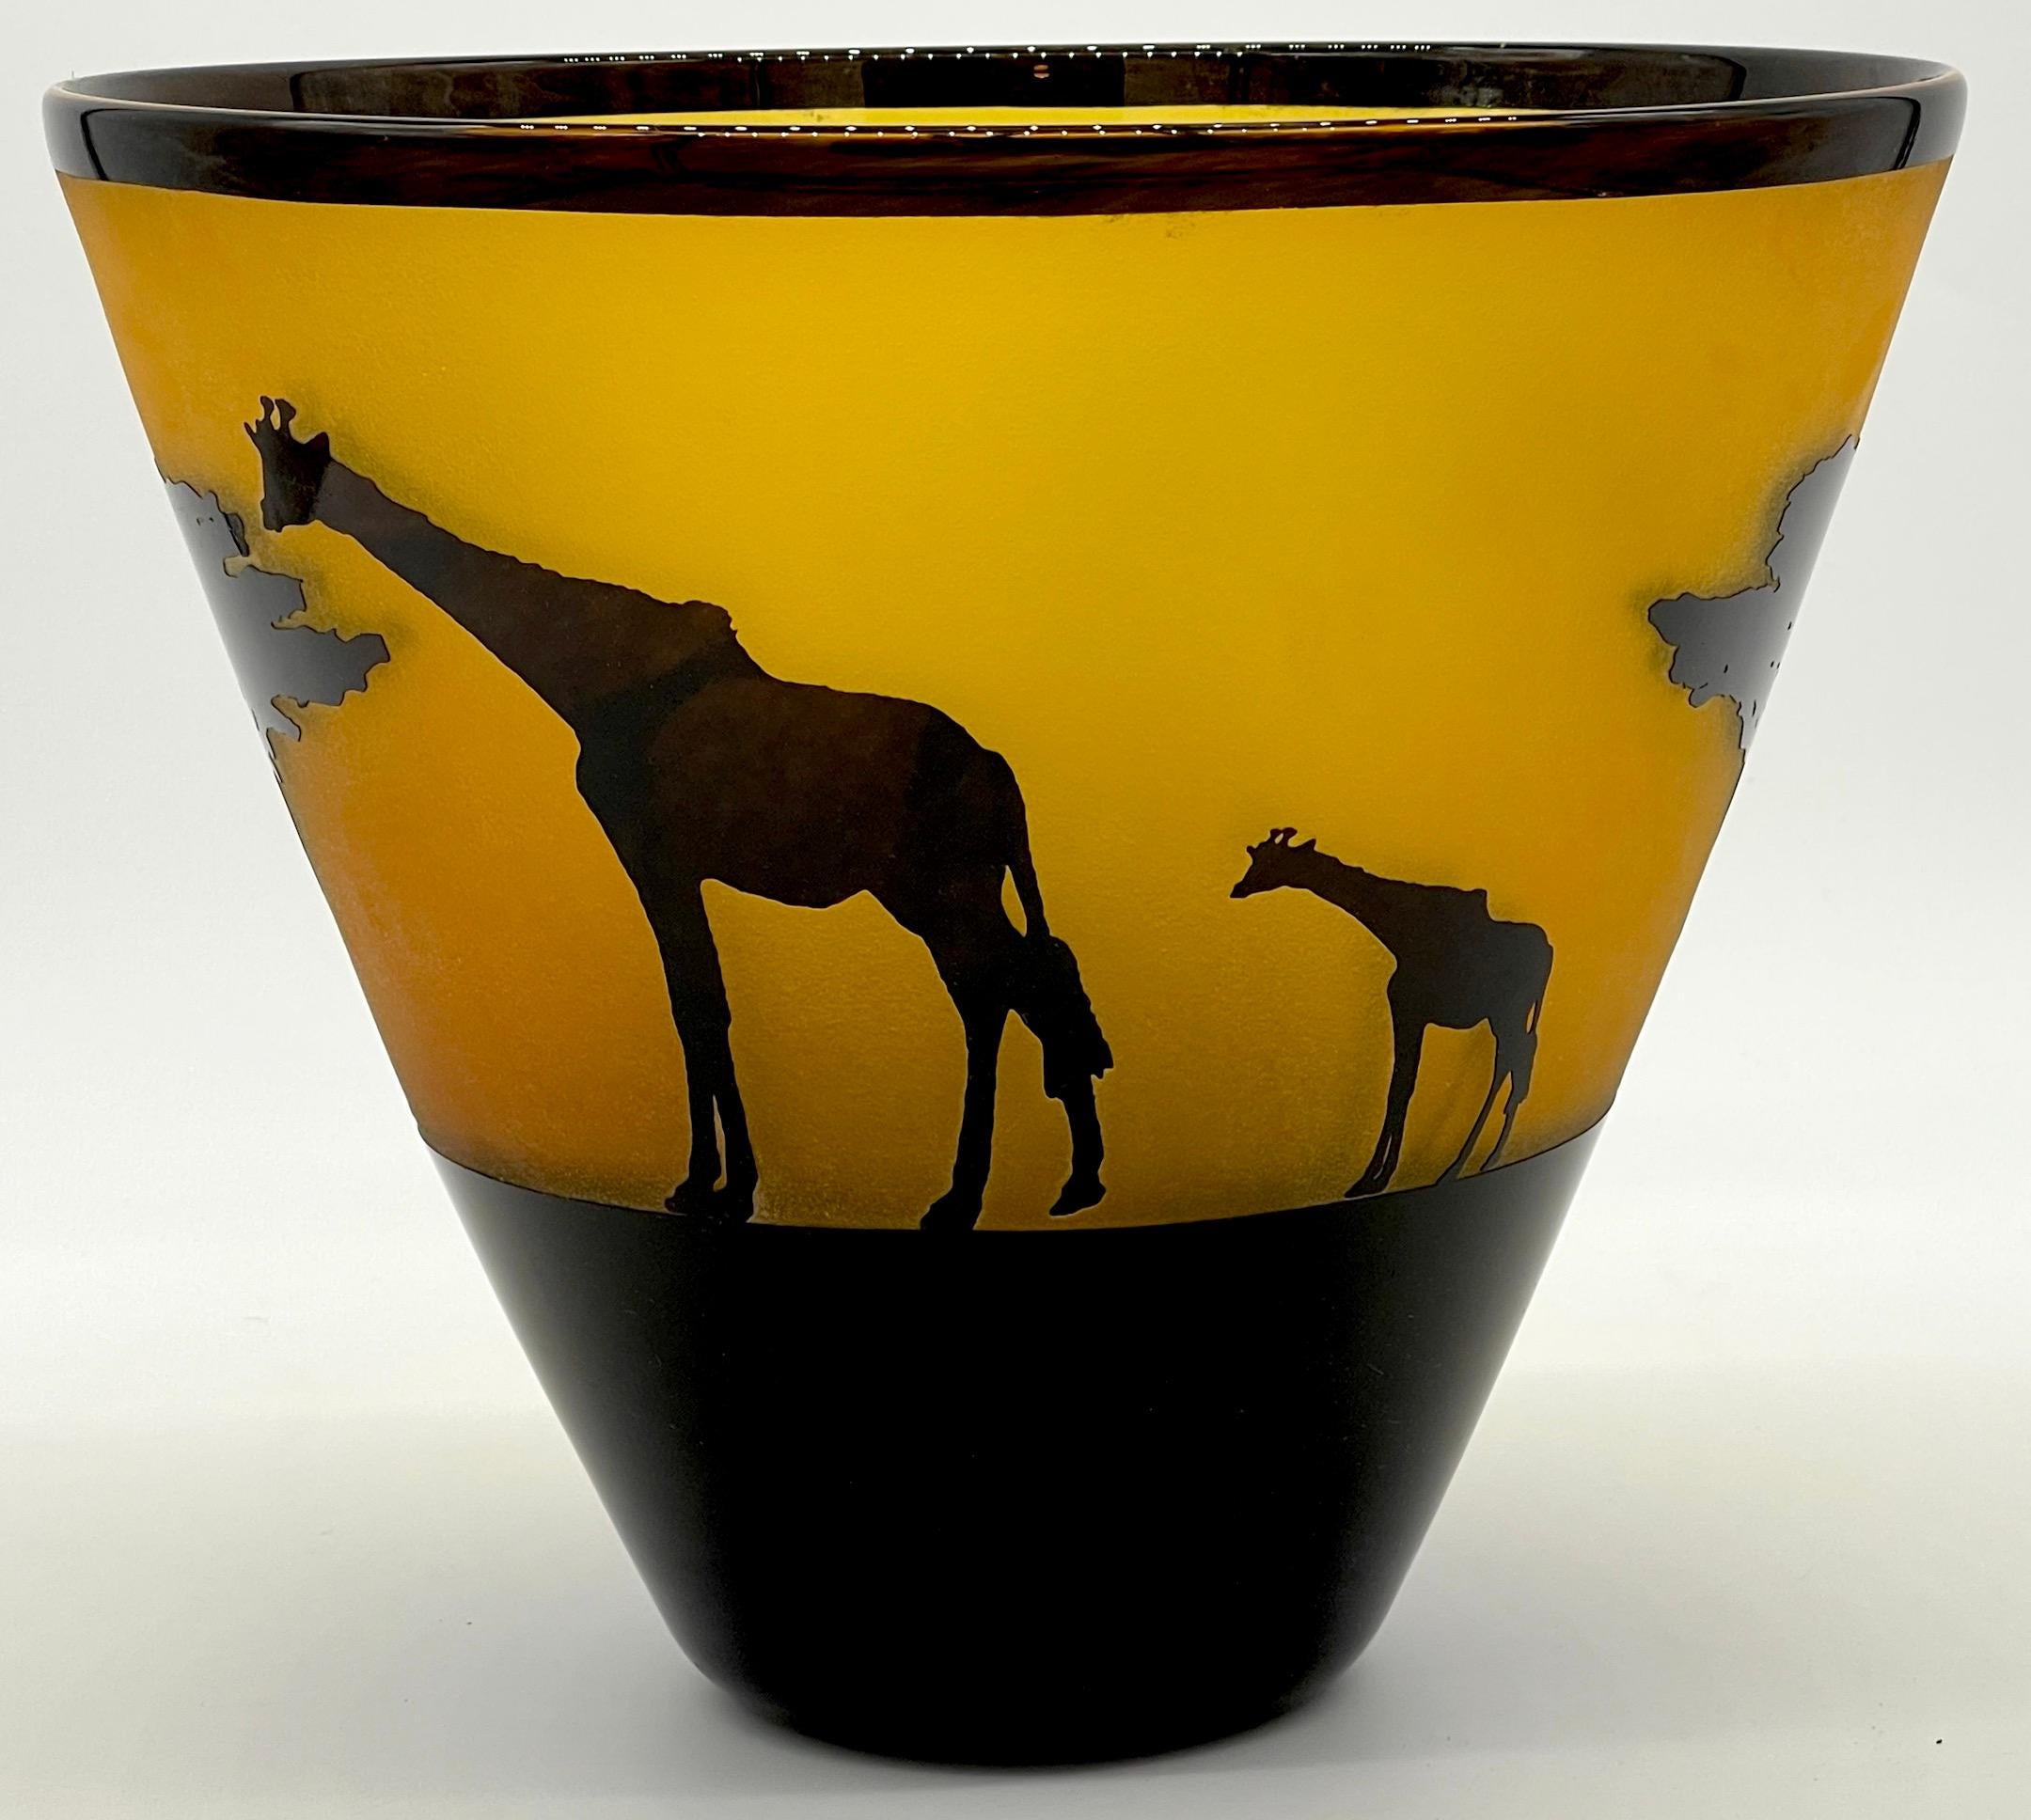 Modern African Landscape Cameo Glass Vase by Steven Correia, 1986 Edition of #168/500